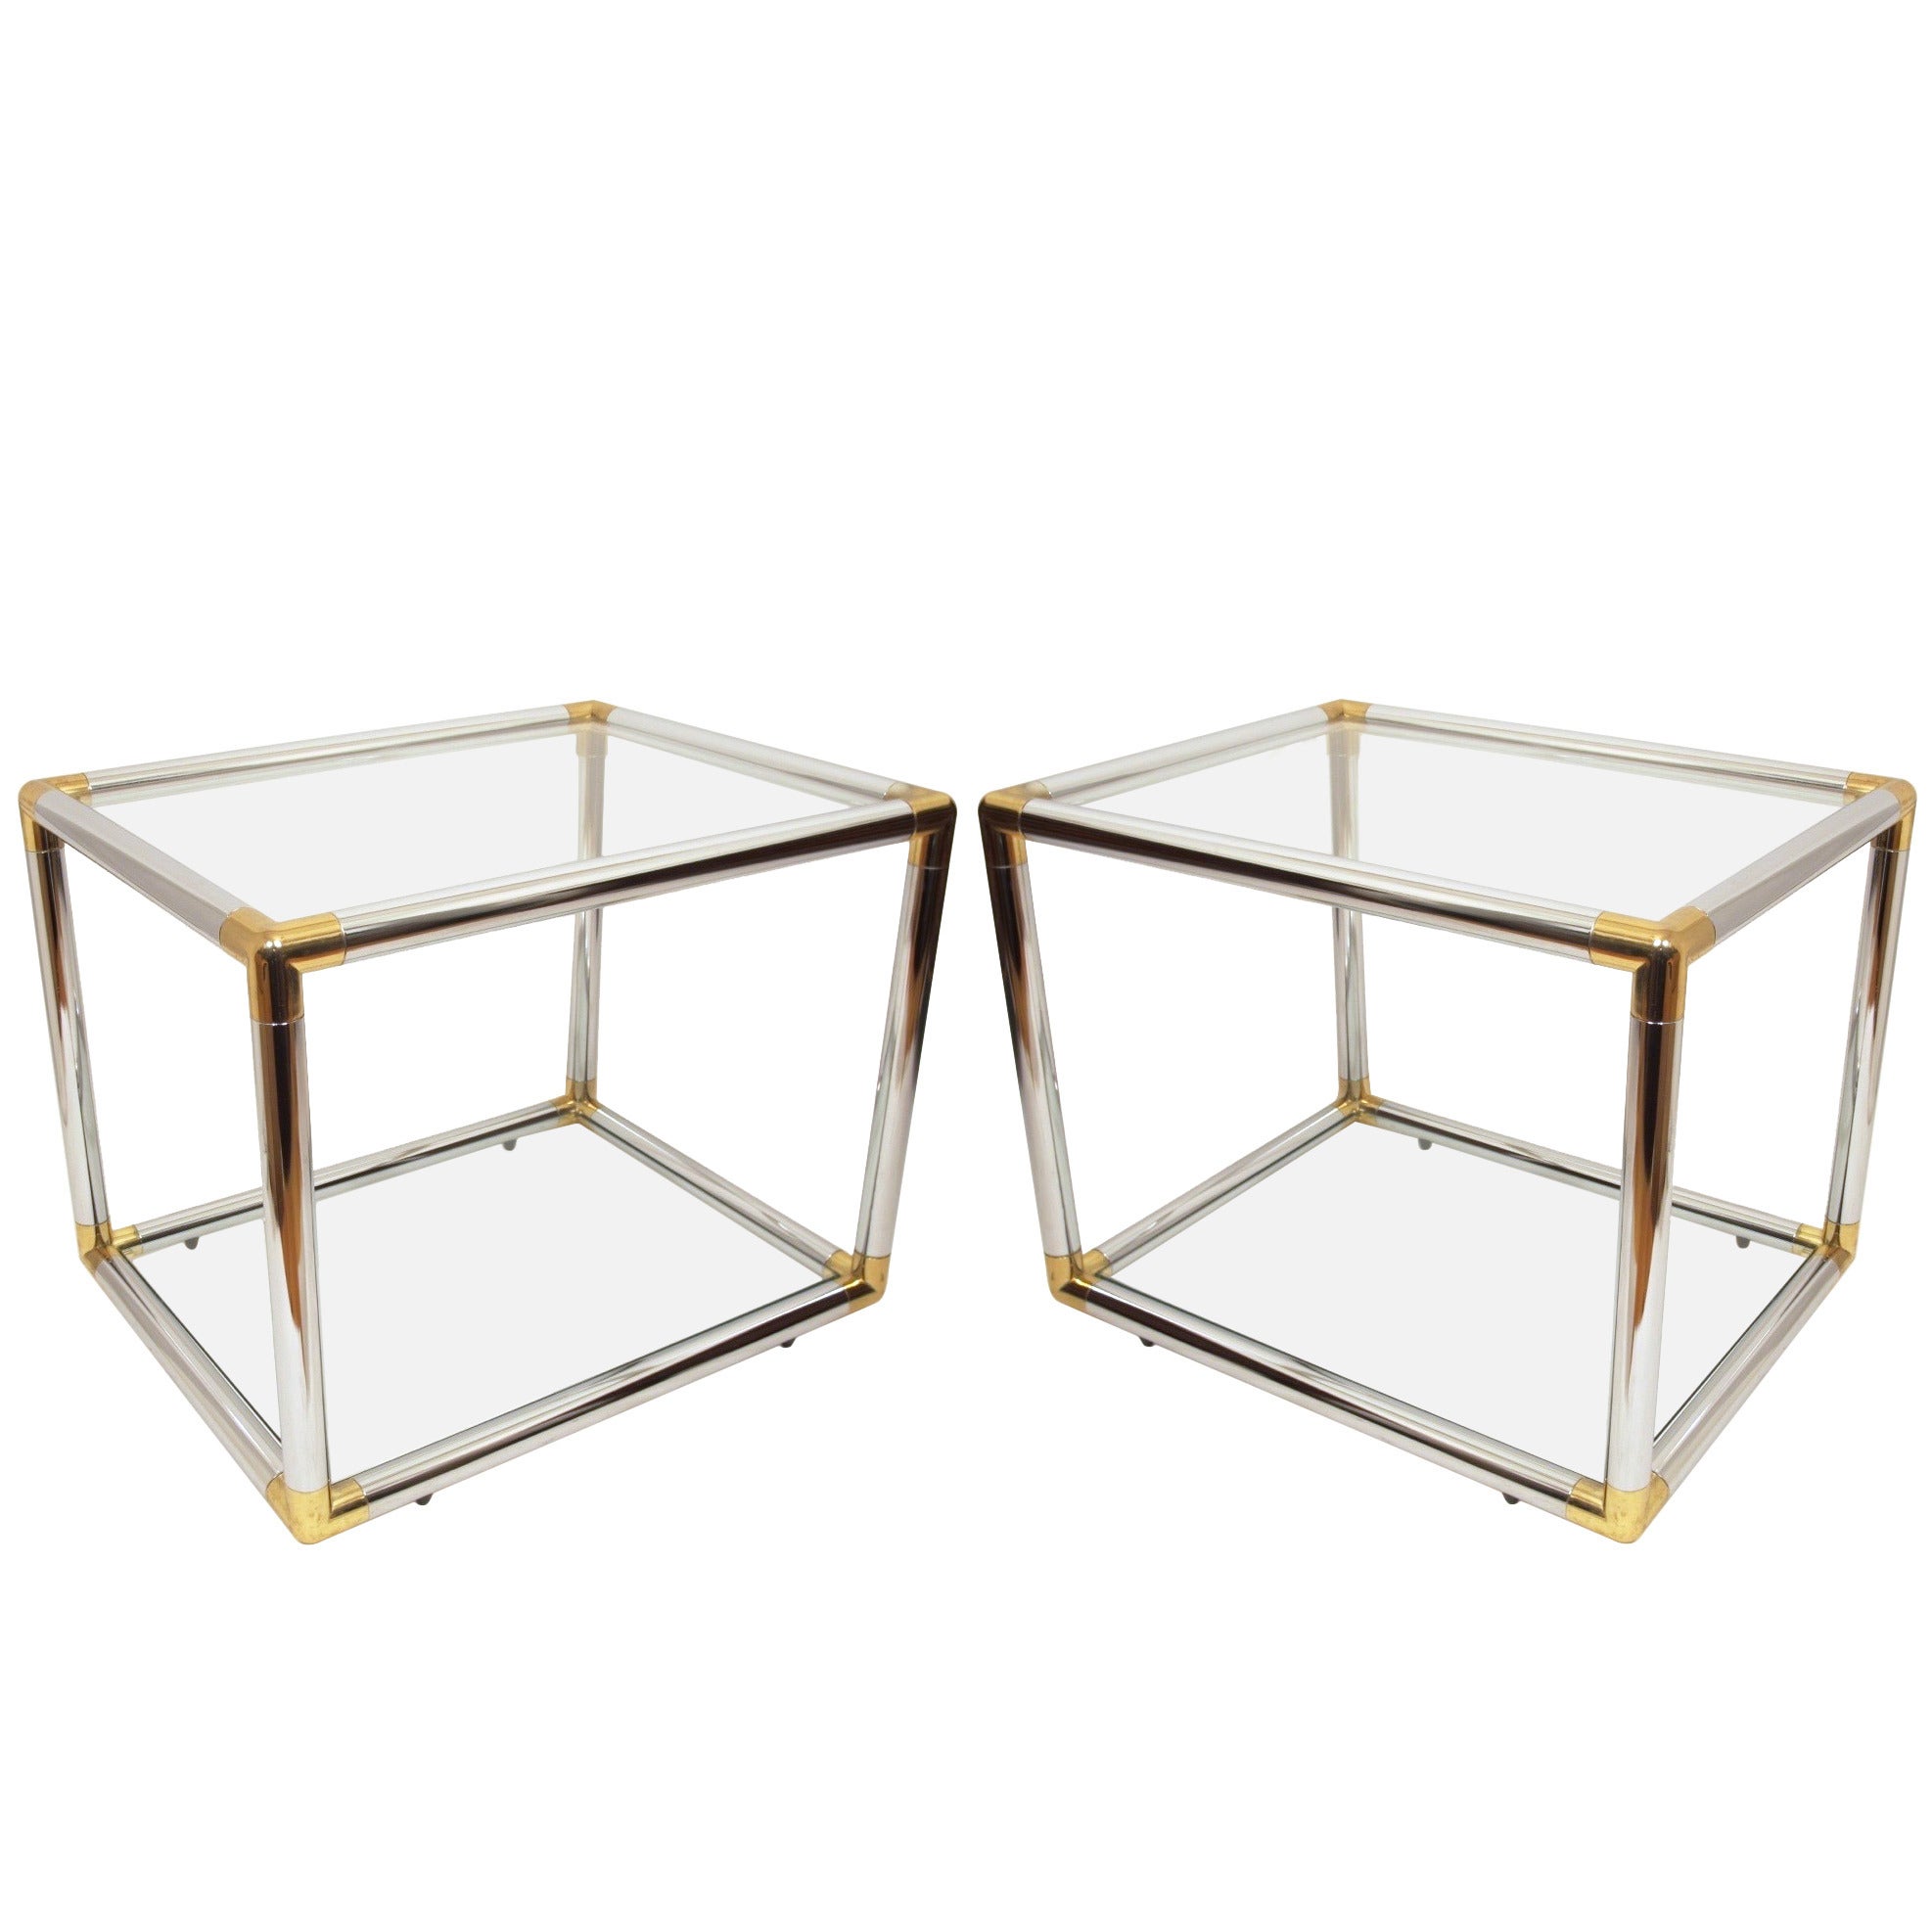 Pair of Italian Mid-Century Modern Chrome and Brass Side Tables